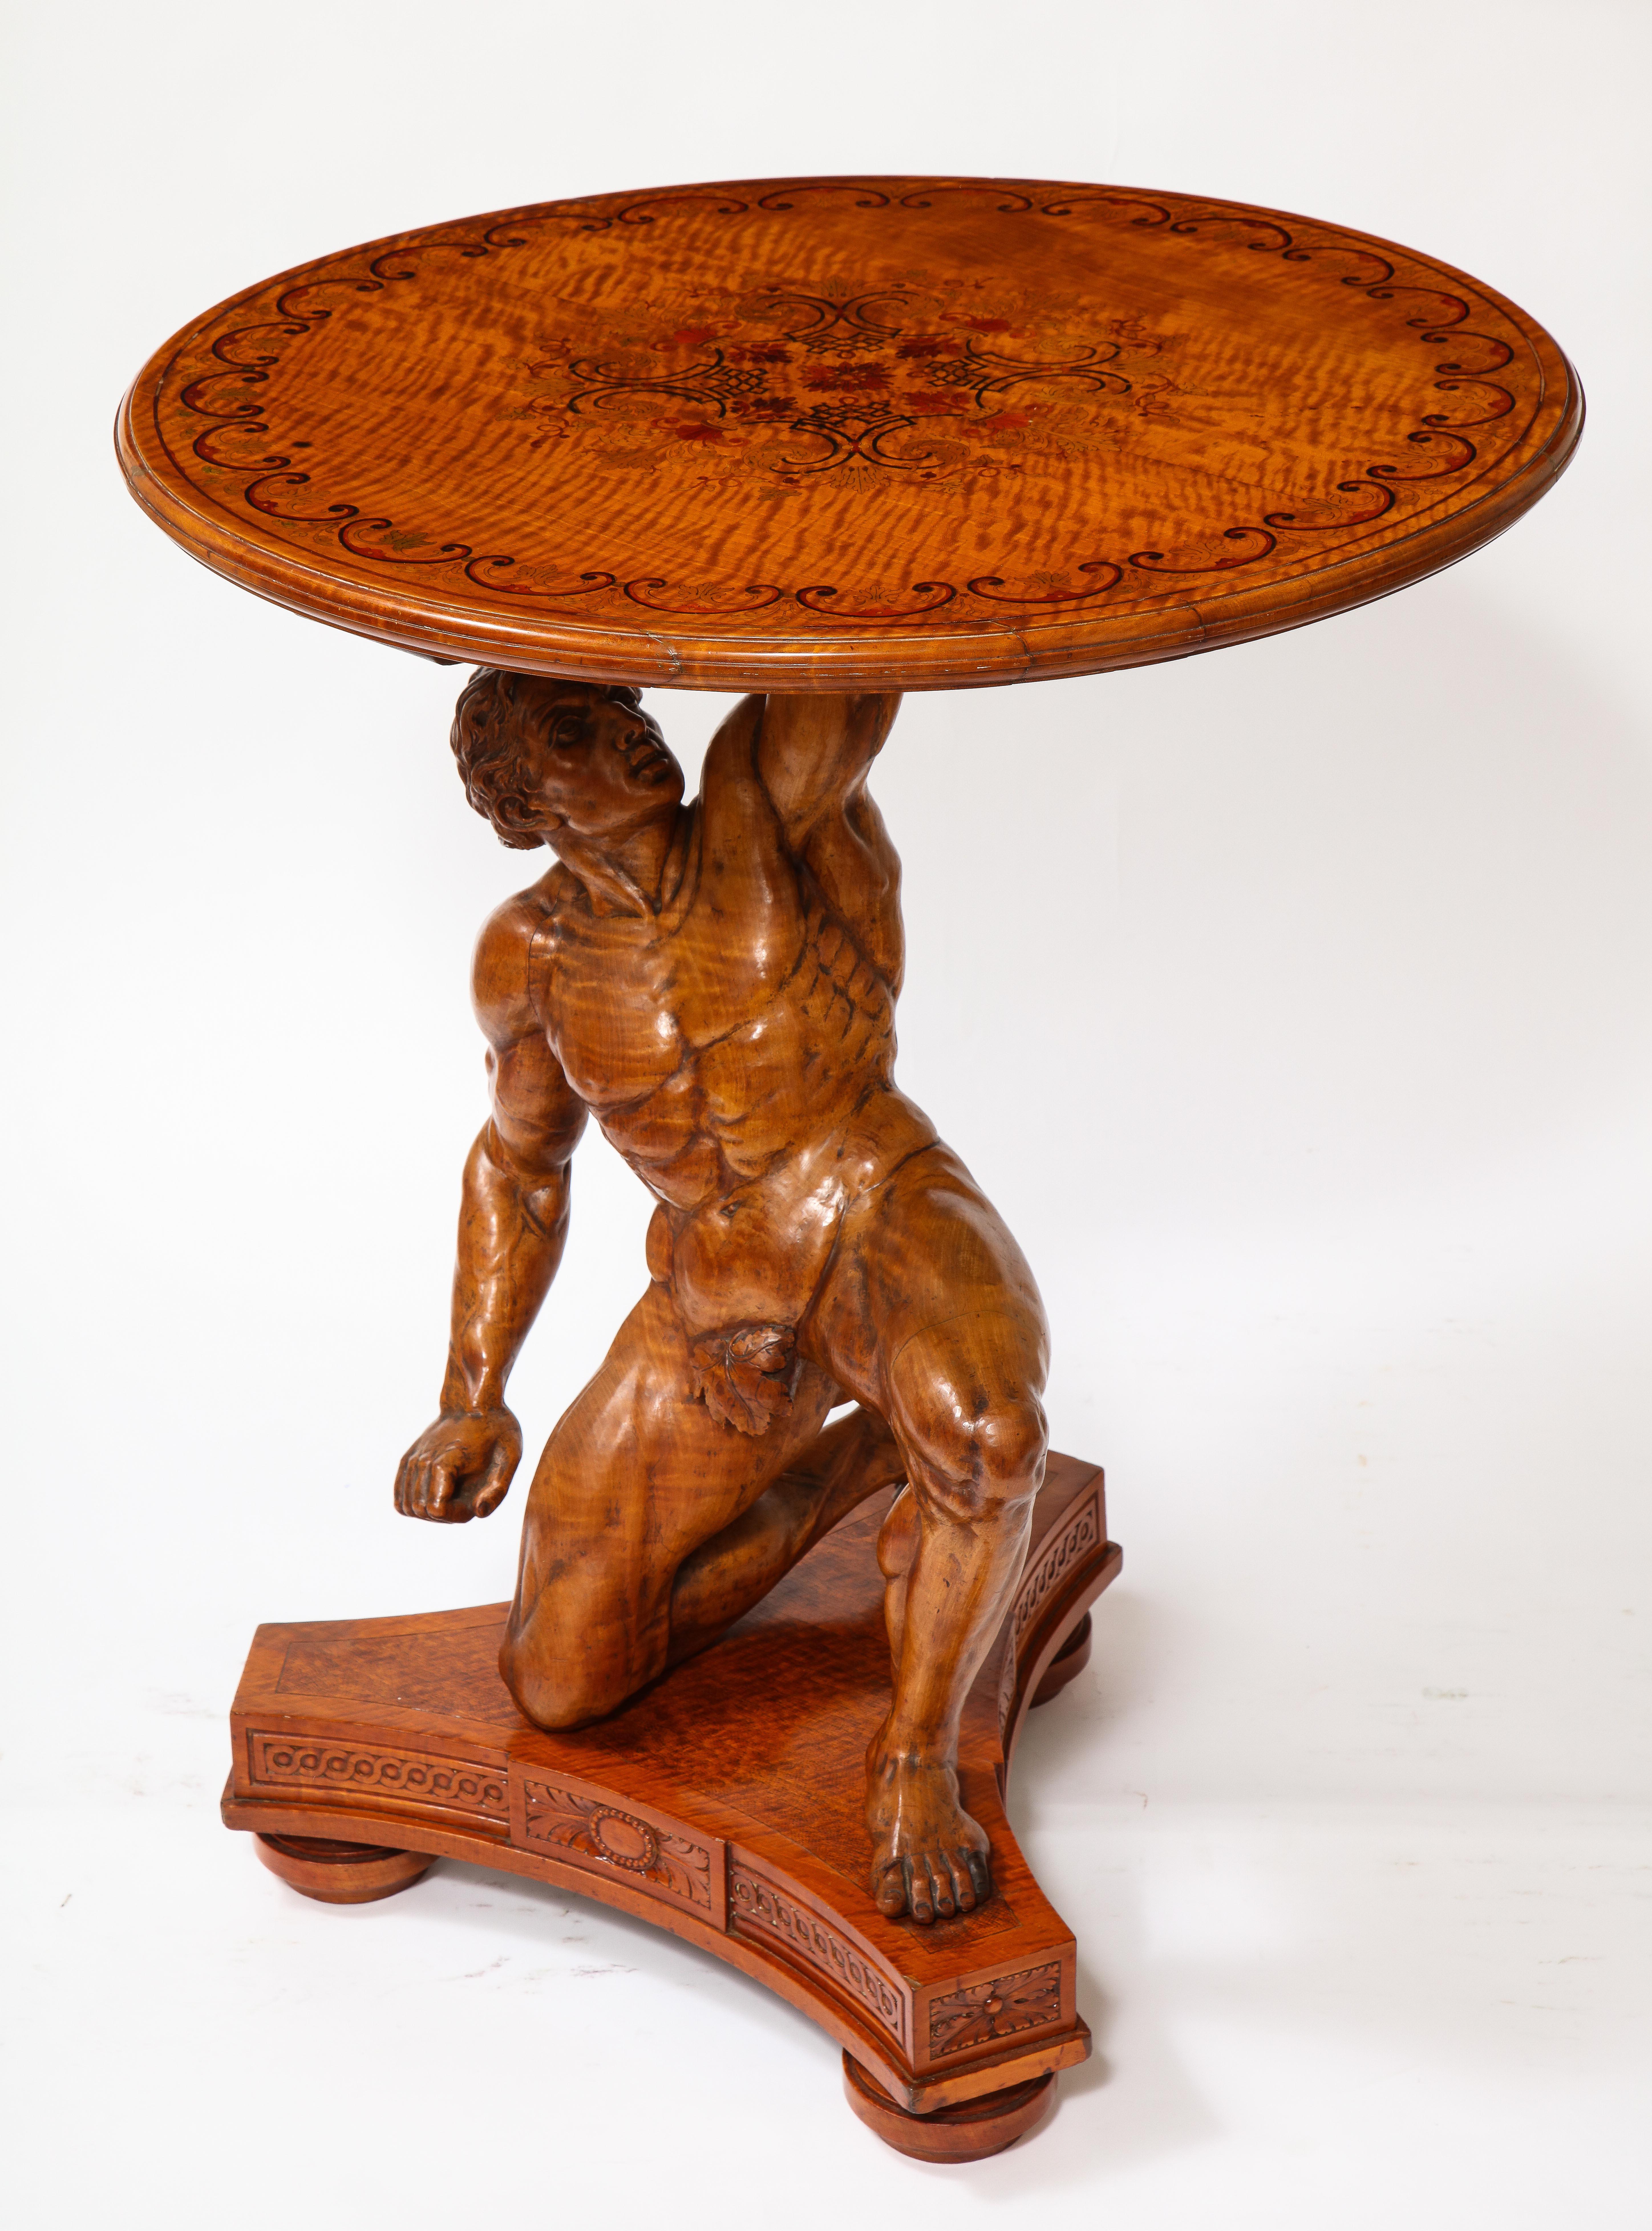 A fabulous antique 19th century hand-carved wood and marquetry center/side table of atlas, Signed J. Plucknett & Co. Warwick, England. The beautifully hand-carved figure of Atlas is seen kneeling on a triangular base with marquetry designs on the